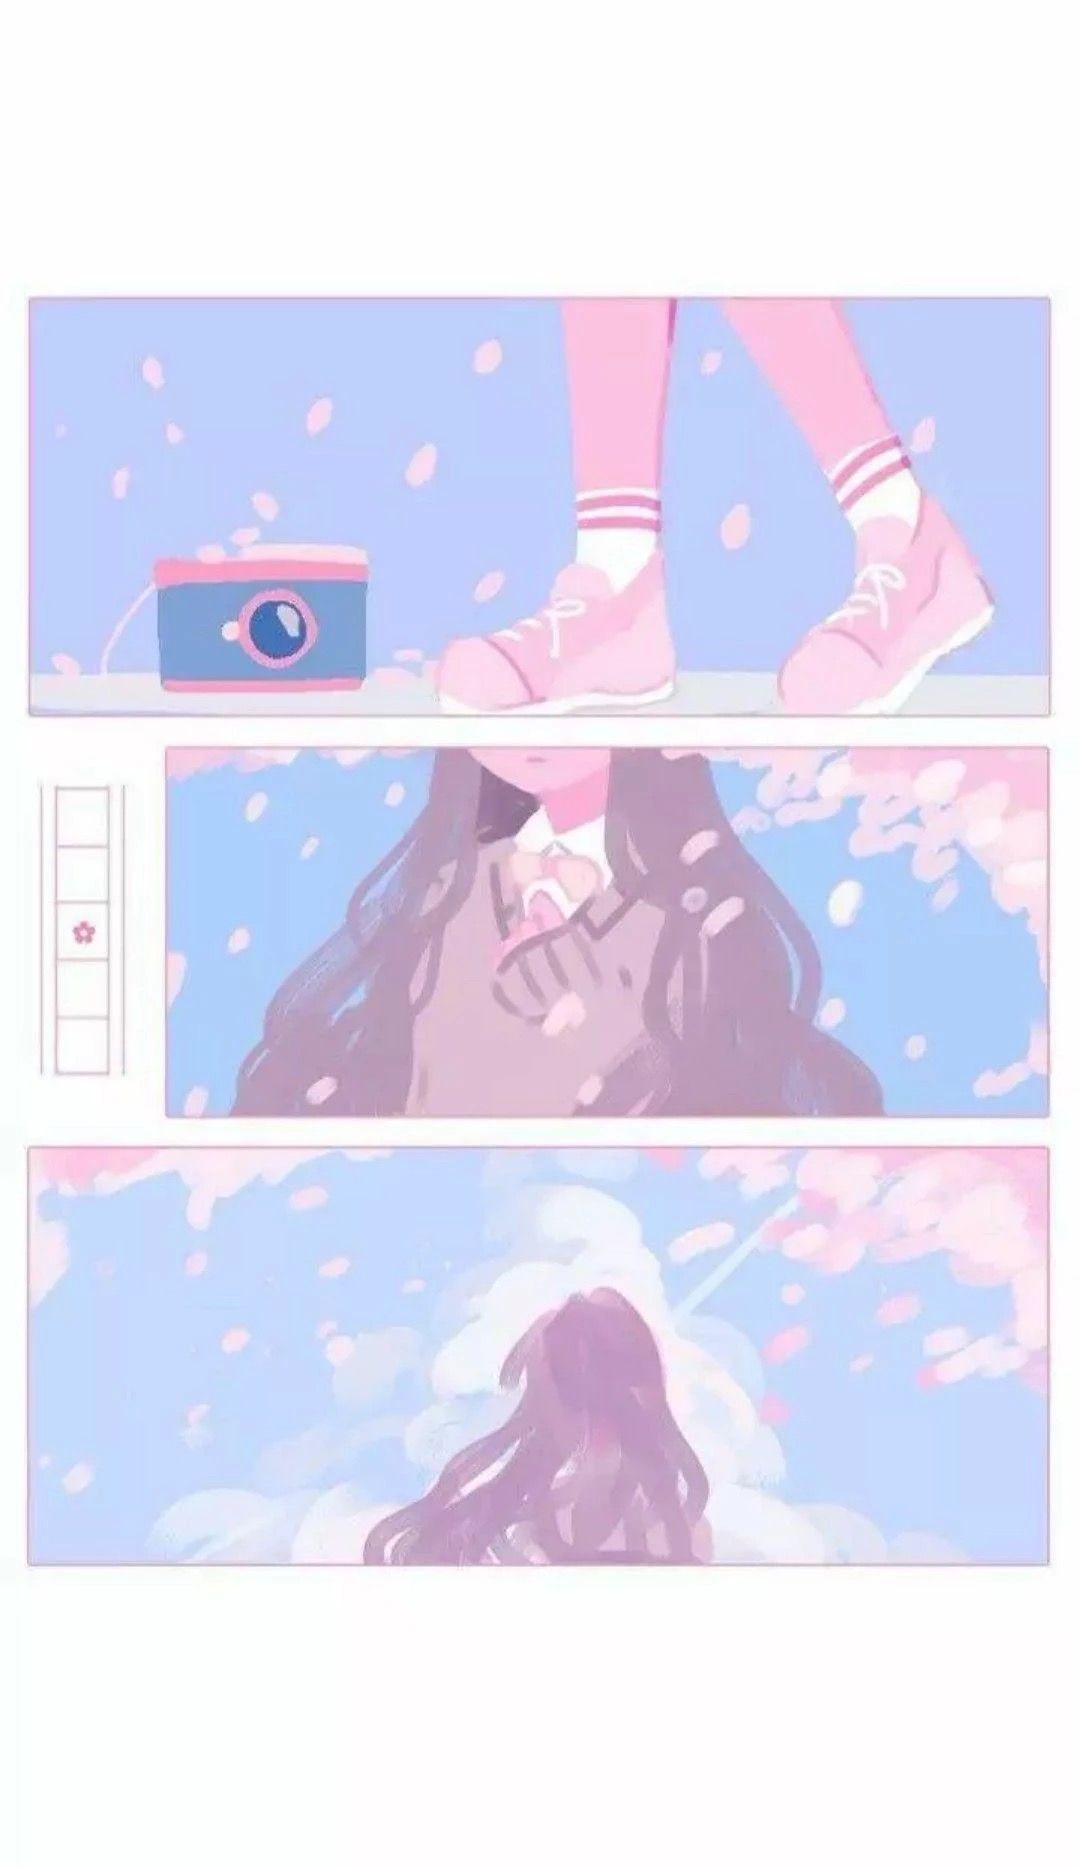 Anime Notebook: Anime Pastel Kawaii Soft Grunge Retro 90s Lofi Aesthetic  Lined Notebook (Journal,Diary) College Ruled 6x9 120 Pages | Anime Notebook  Collection : Publishing, Kawaii Anime: Amazon.sg: Books